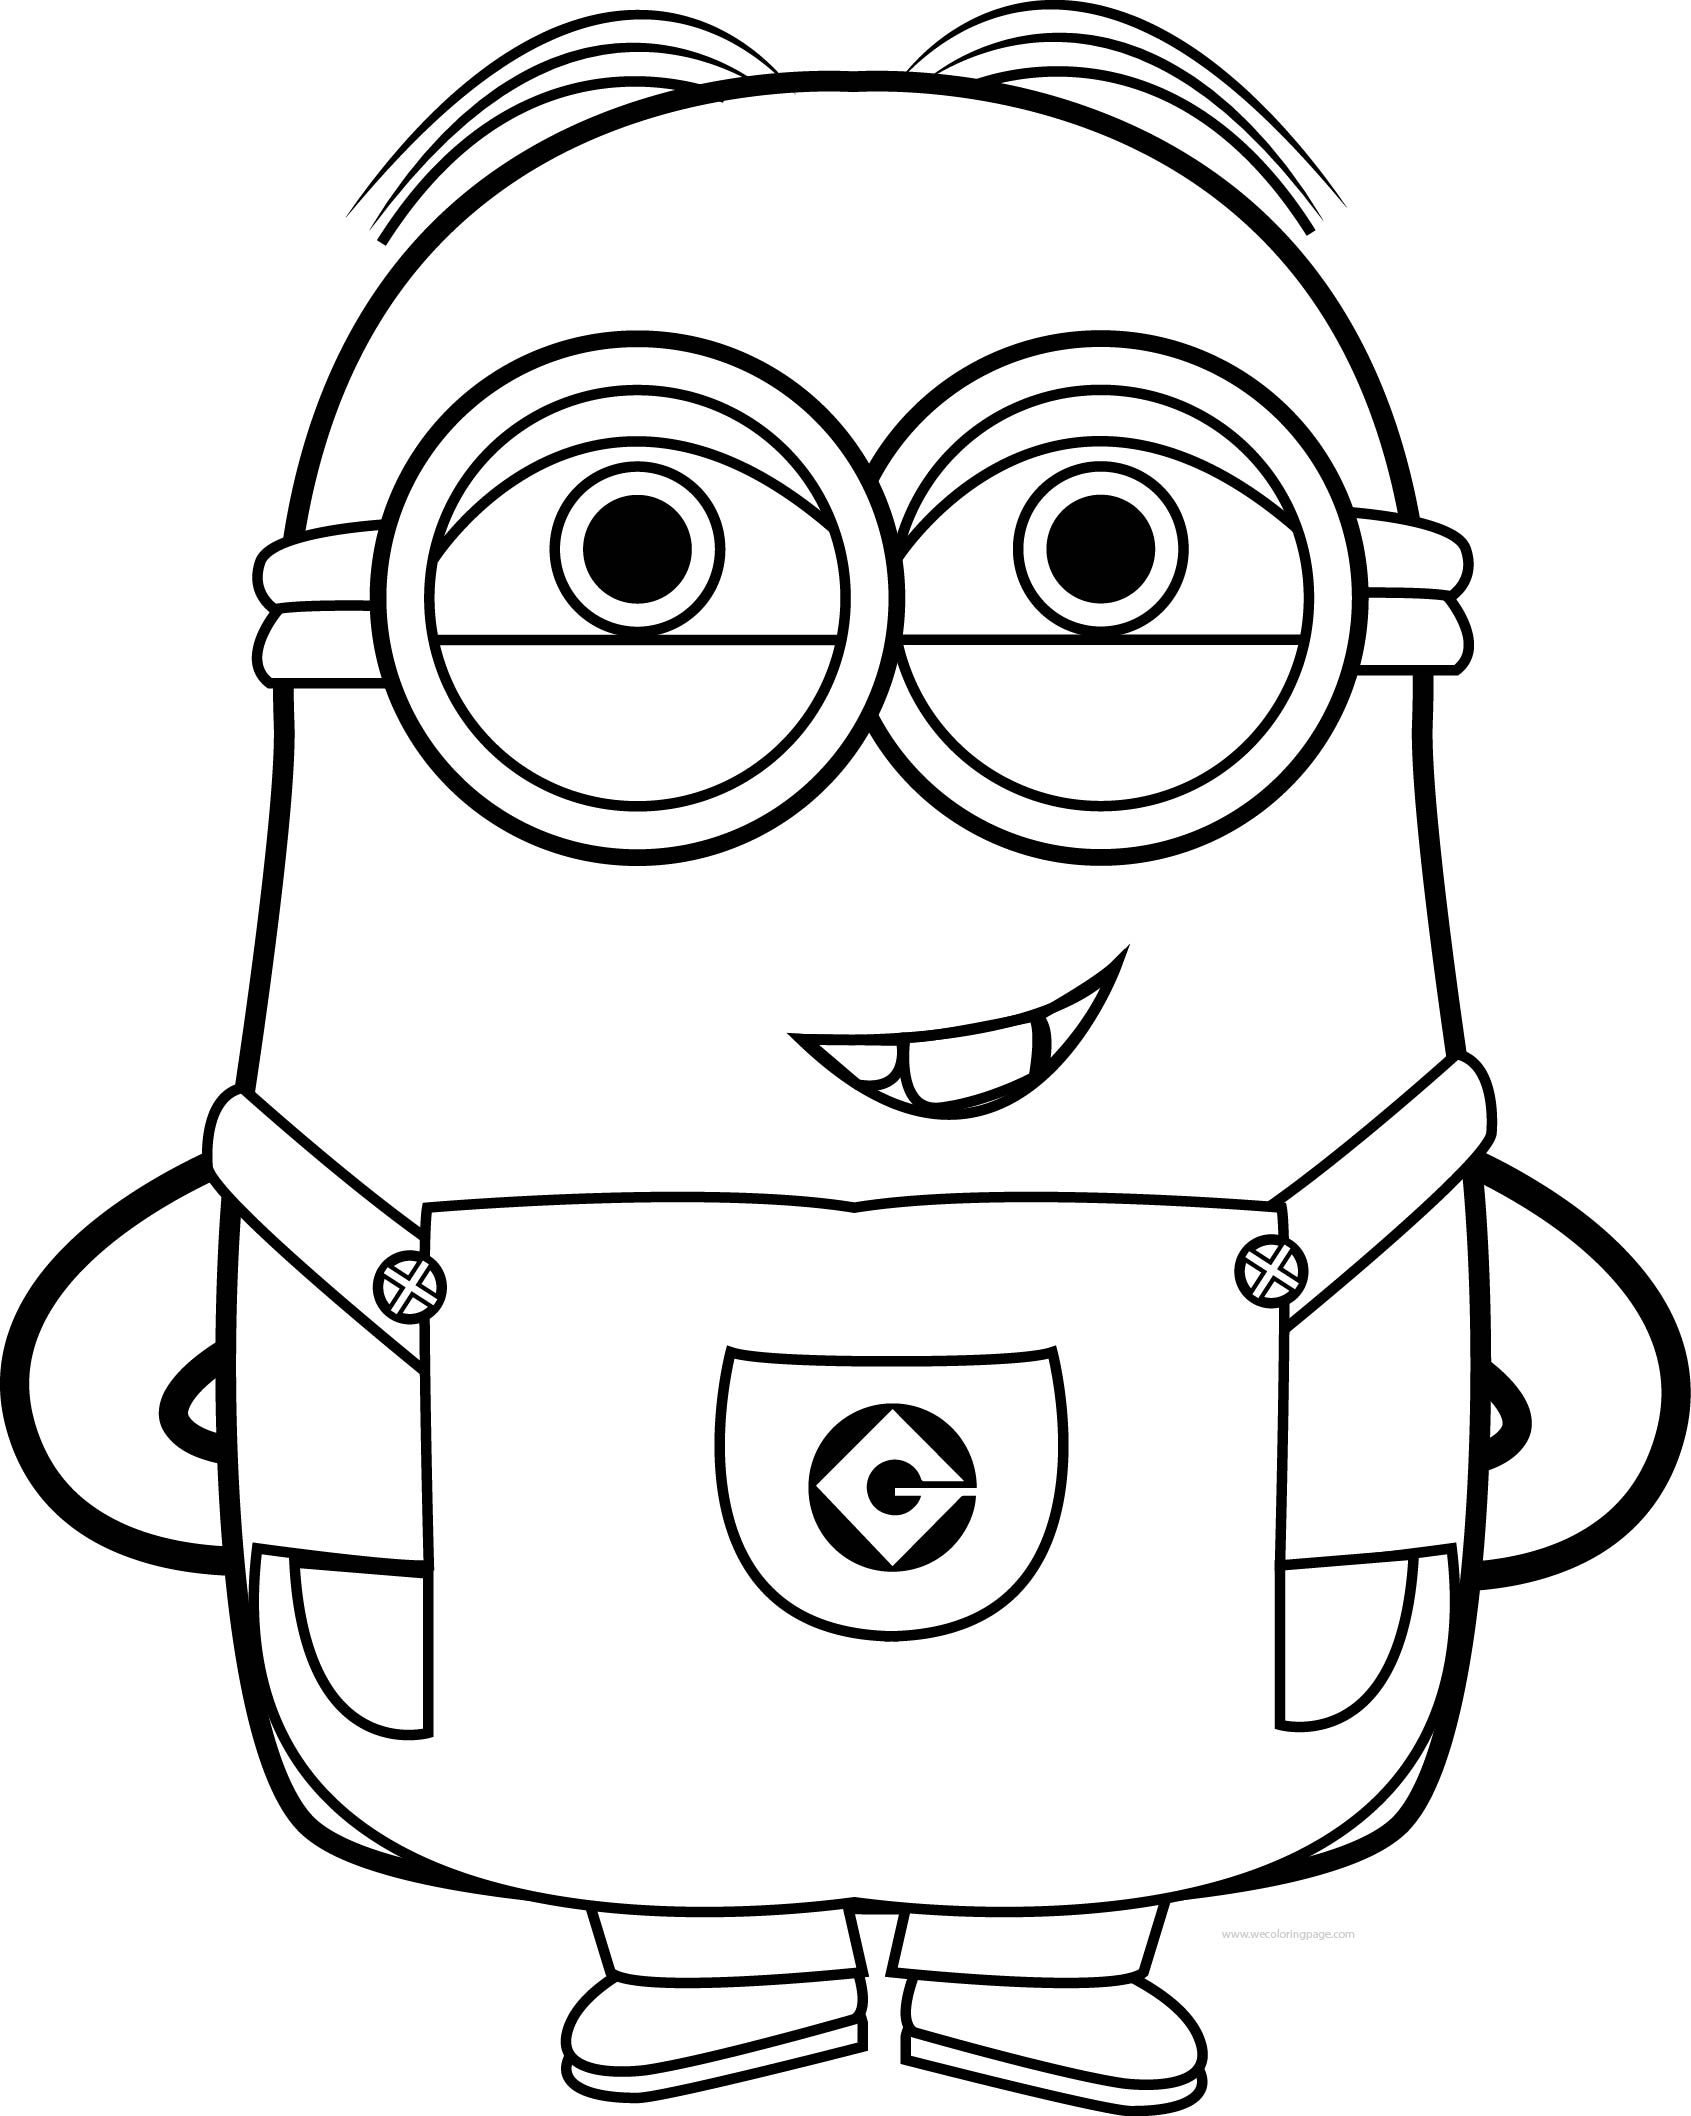 Cute Minion Coloring Pages at GetColorings.com | Free printable